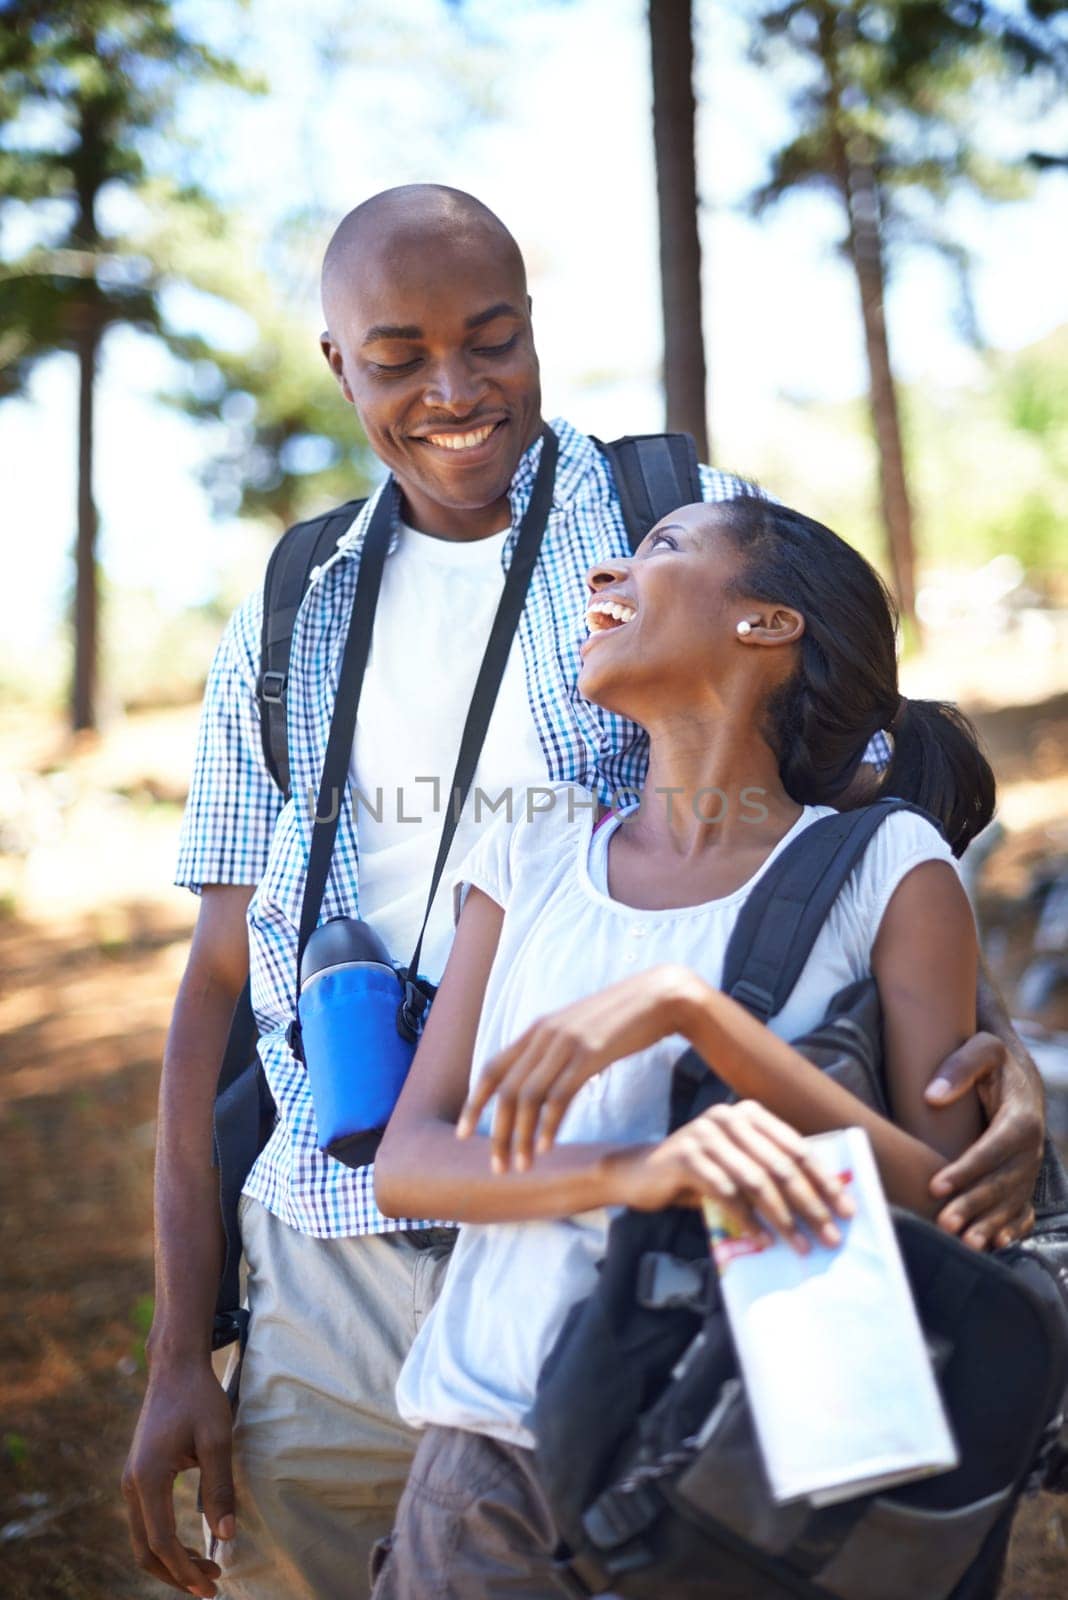 Happy black couple, hiking and bonding in forest for outdoor adventure, travel or holiday together in nature. African man and woman smile in woods enjoying fresh air, trip or trekking for weekend.